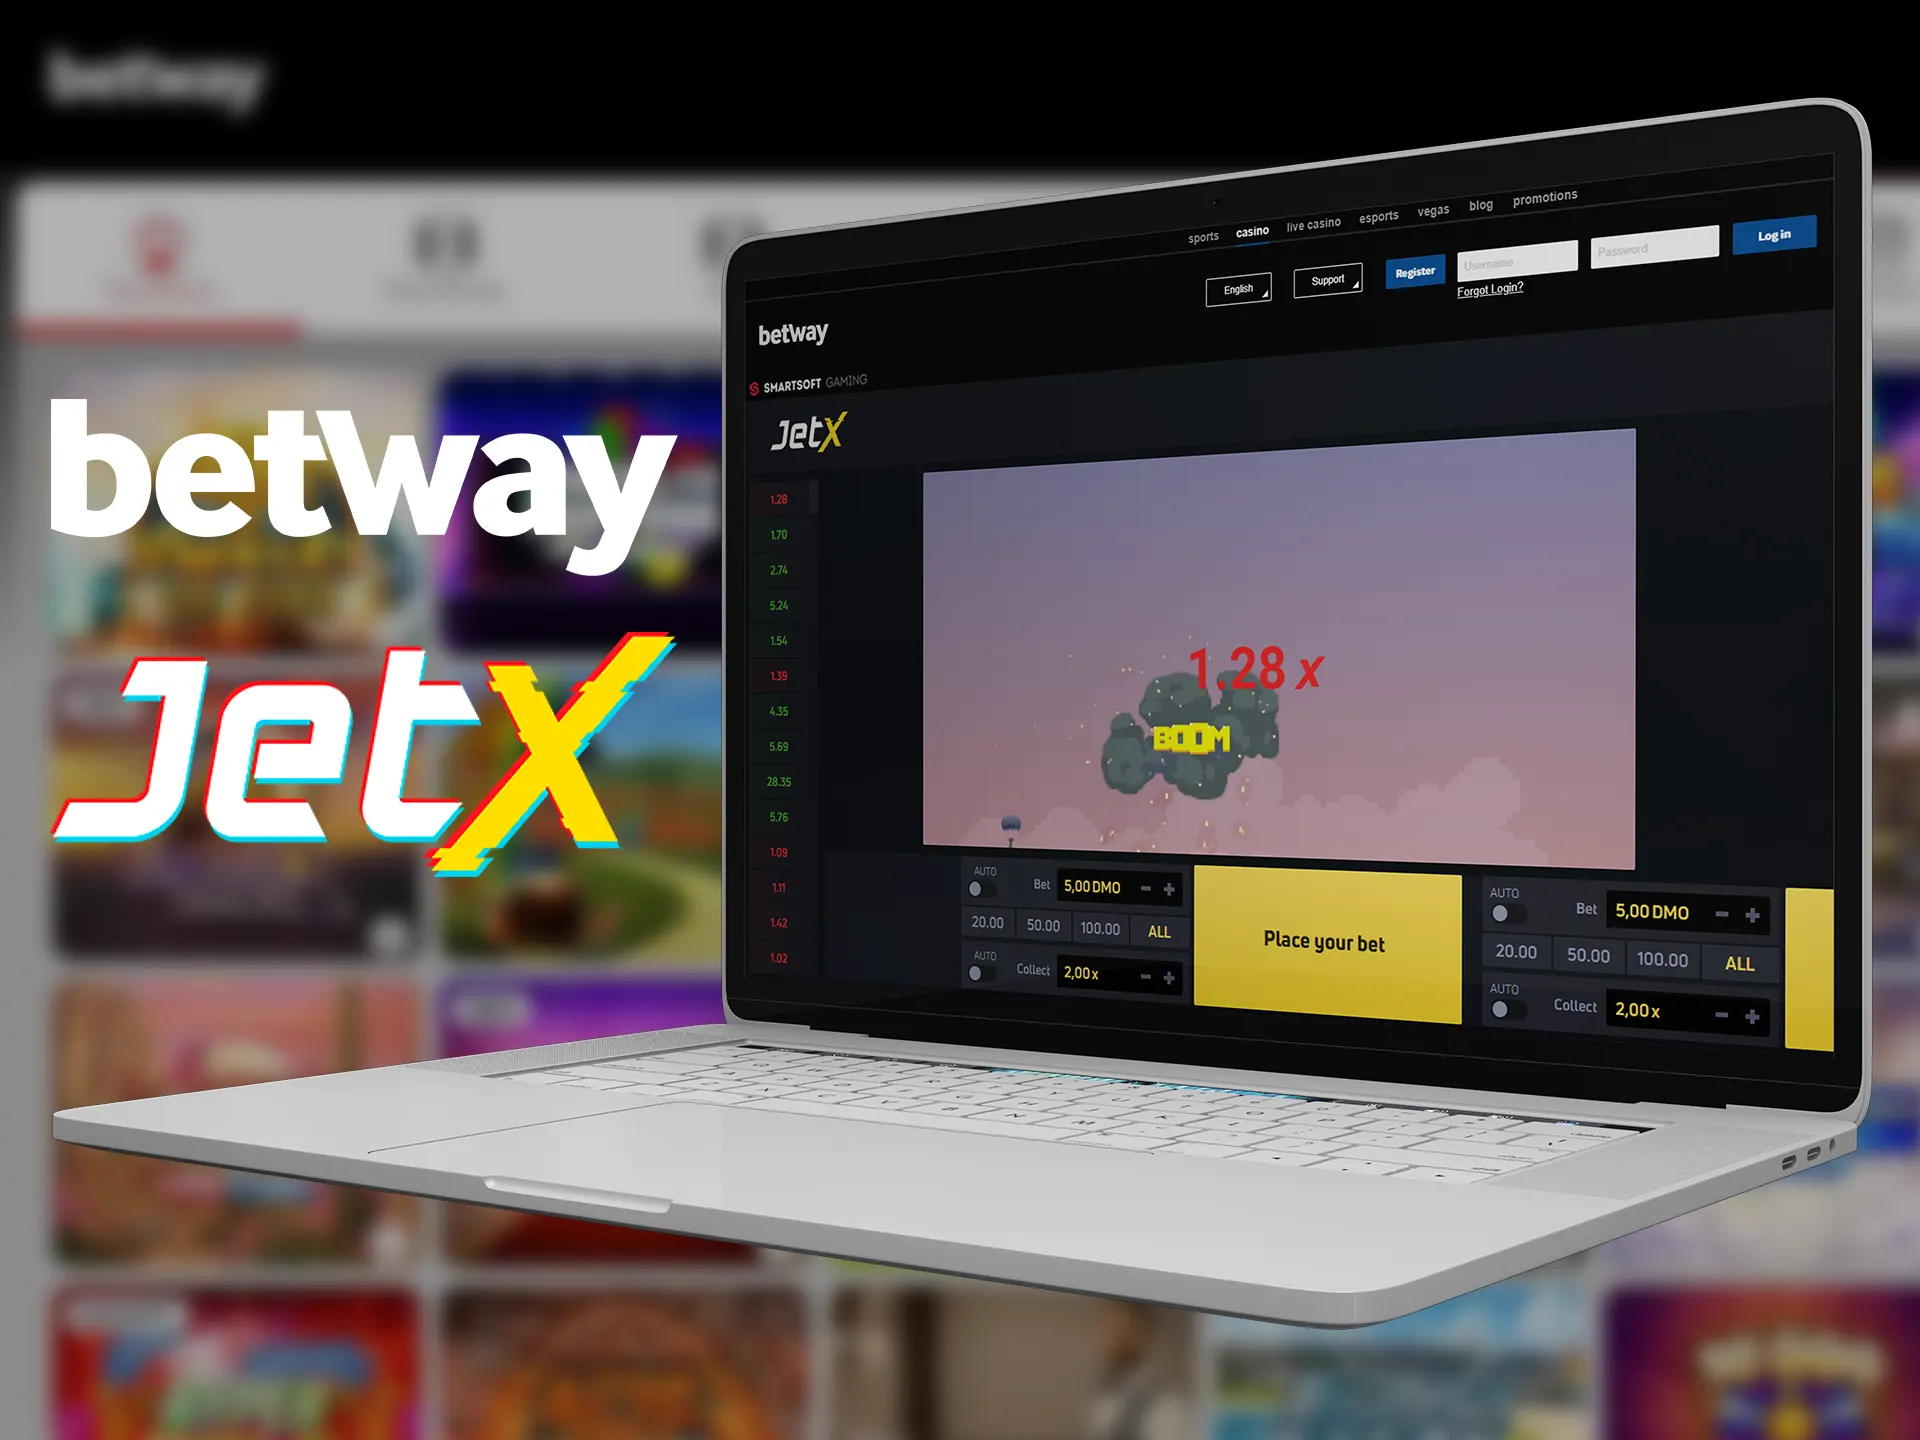 Play the JetX game with joy at the Betway casino.